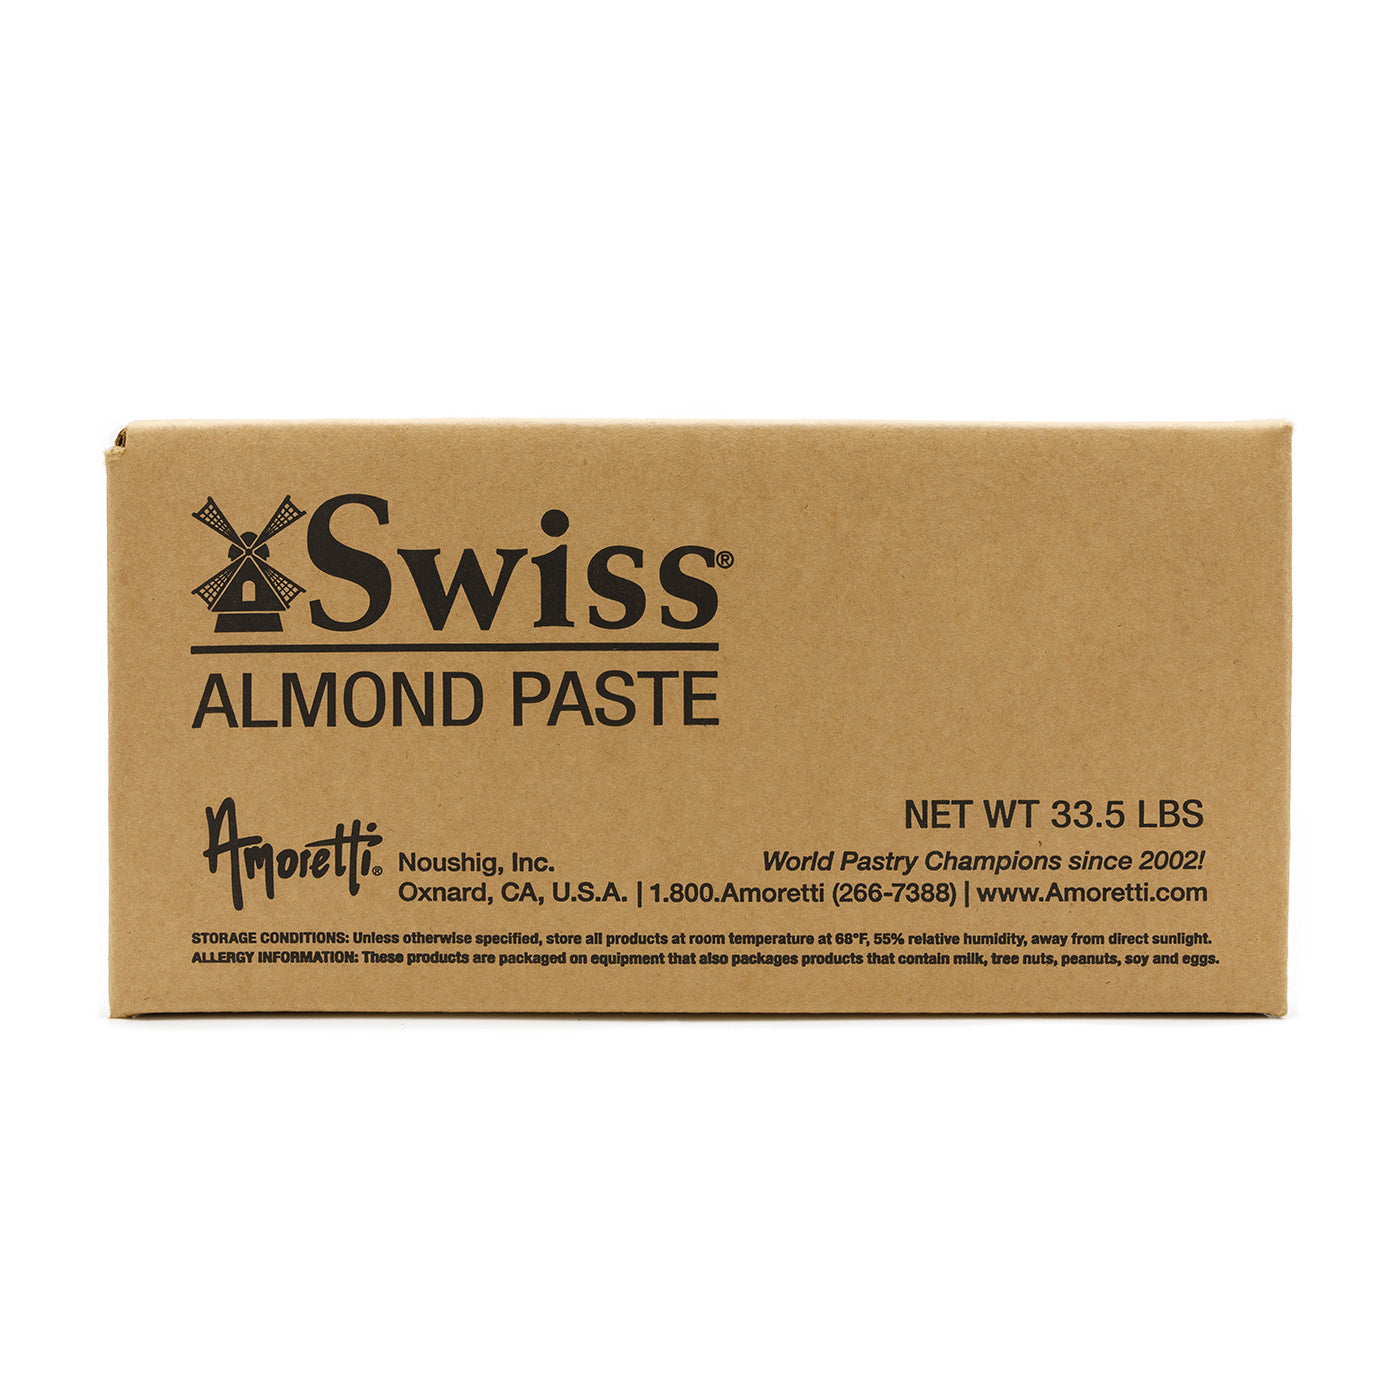 Amoretti’s Blanched Almond Paste is made from quality almonds that are ground down to a thick delicious paste that is lightly sweetened.